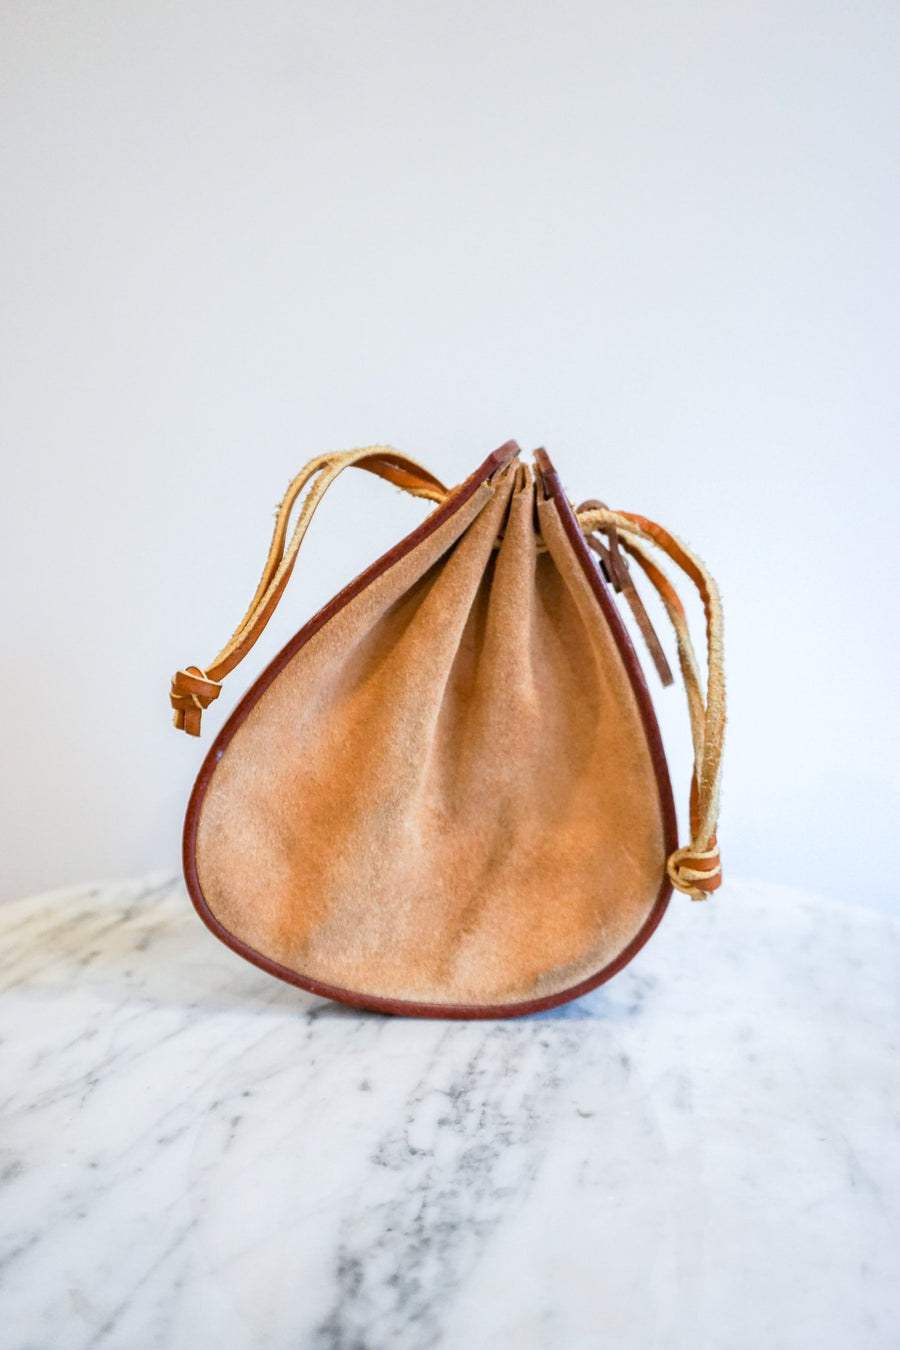 Authentic - Hand Stamped Vintage "Dale Evans" (Roy Rodger's Wife) Leather Drawstring Pouch With Leather Cords